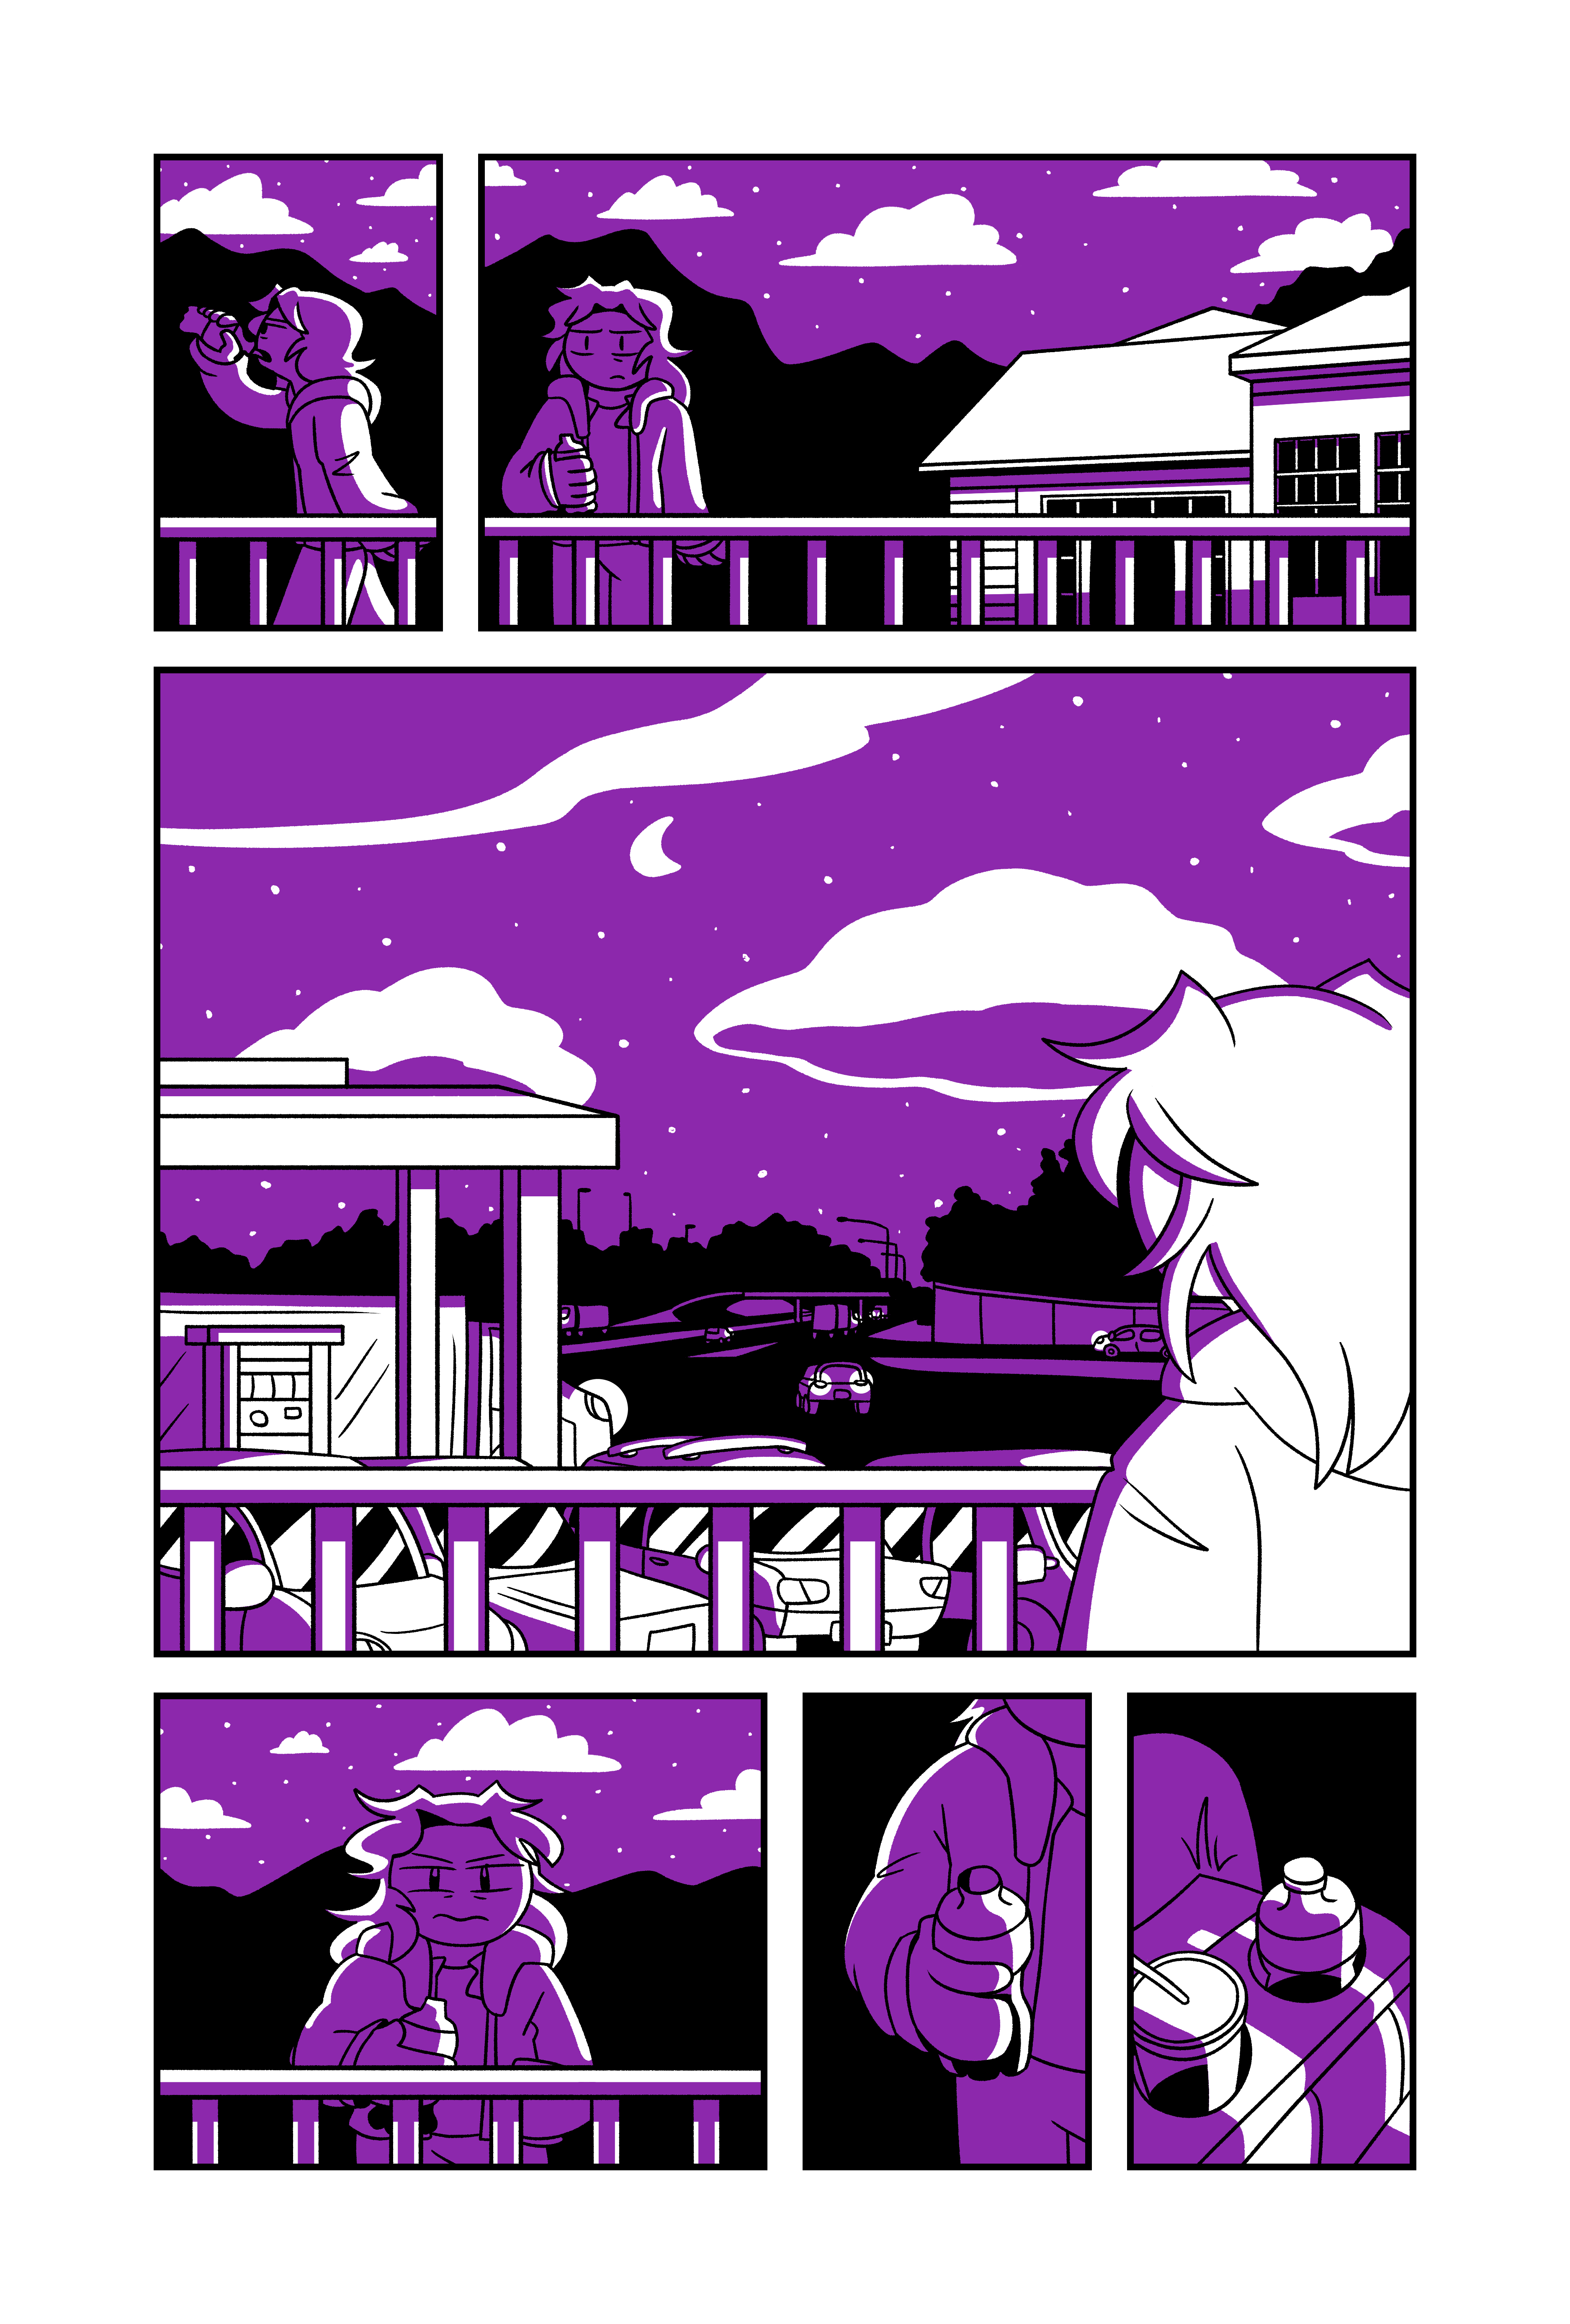 Excerpt from <i>All My Happiness is Gone</i>, a short comic named after the song by Purple Mountains